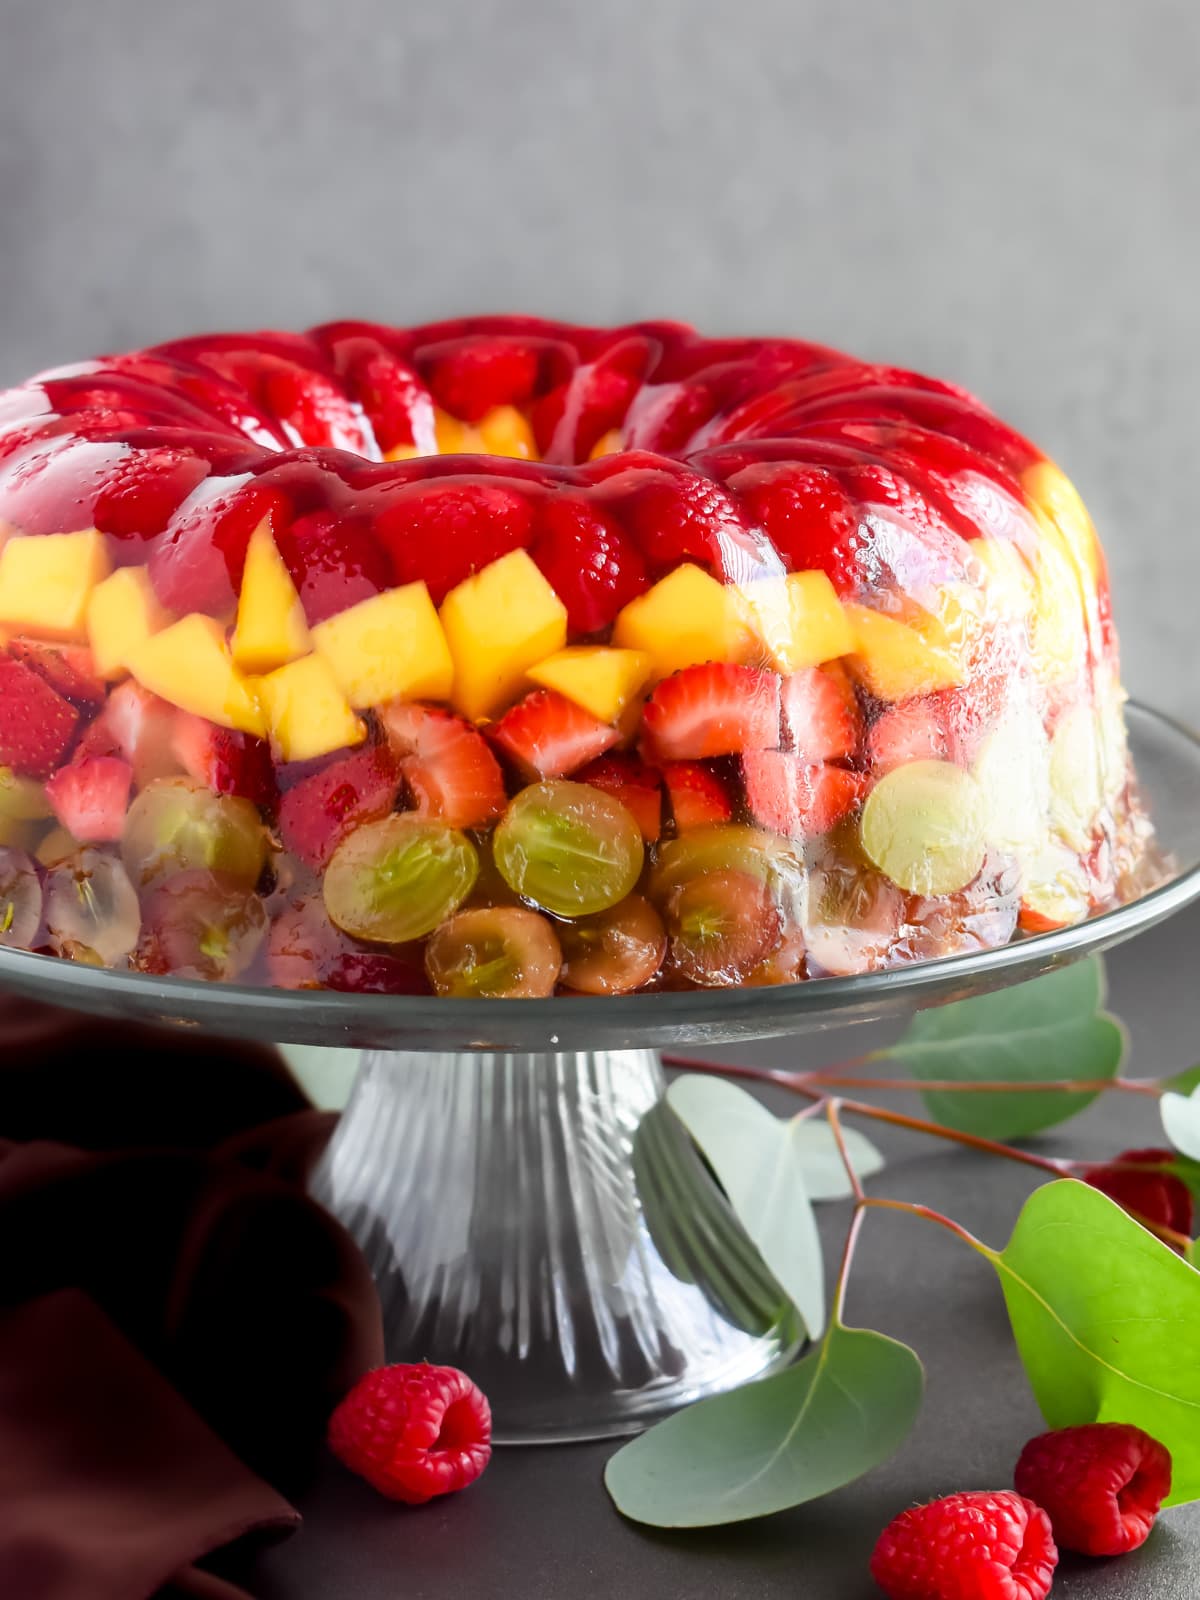 This jello fruit cake combines fresh fruits with your favorite juice. It is vibrant and refreshing and is loved in summers and during major holidays. You can serve it instead of fruits or as a dessert when you need an easy and crowd-pleasing no-bake dessert. Have fun with different jello flavors and fruits!